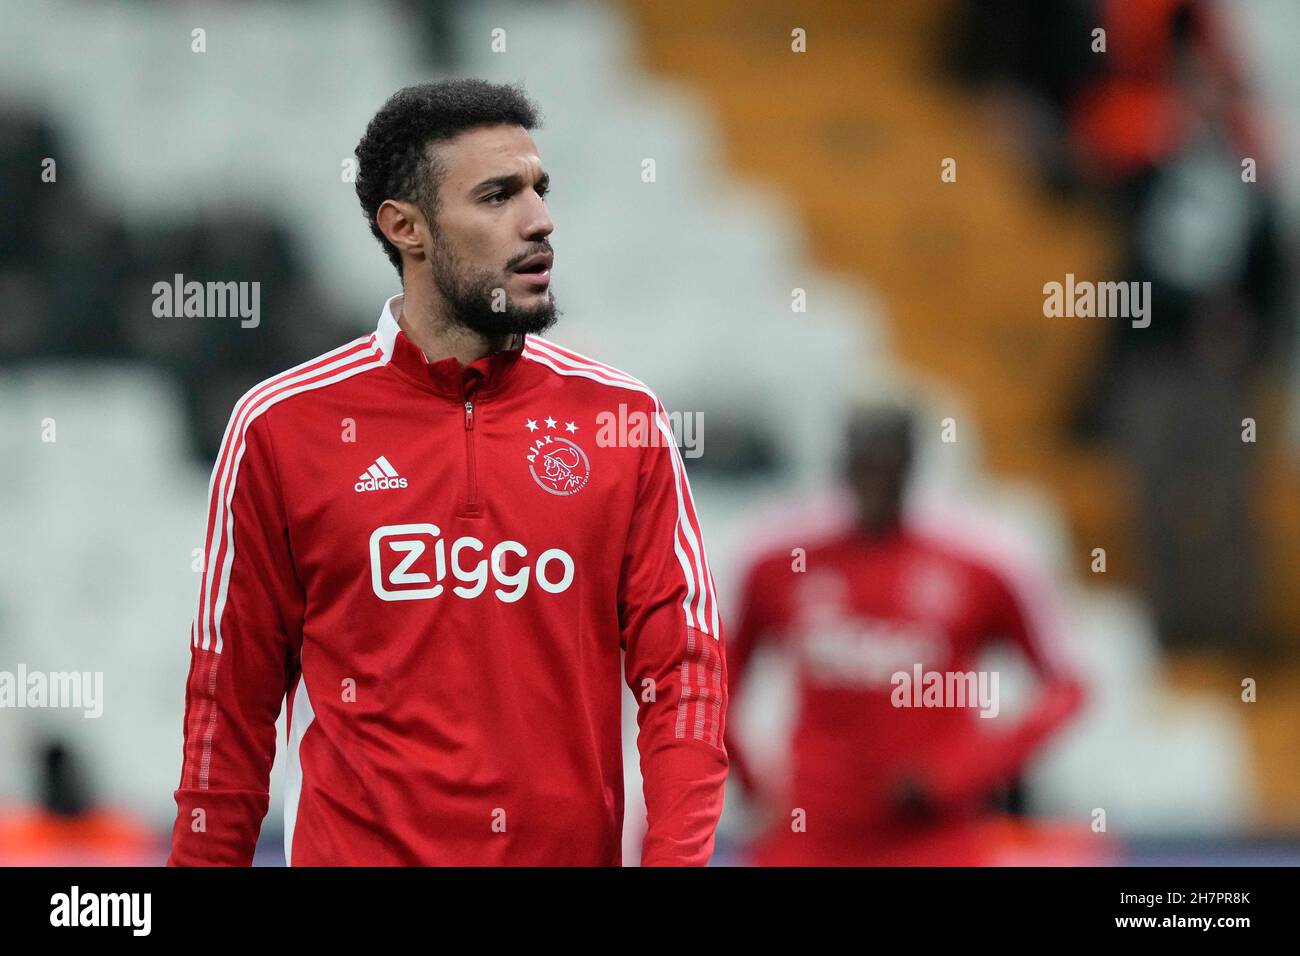 ISTANBUL , 24-11-2021 , Vodafone Park , football, Champions League, season  2021 / 2022 , between Besiktas and Ajax , Ajax player Noussair Mazraoui  (Photo by Pro Shots/Sipa USA) *** World Rights Except Austria and The  Netherlands *** Stock Photo - Alamy